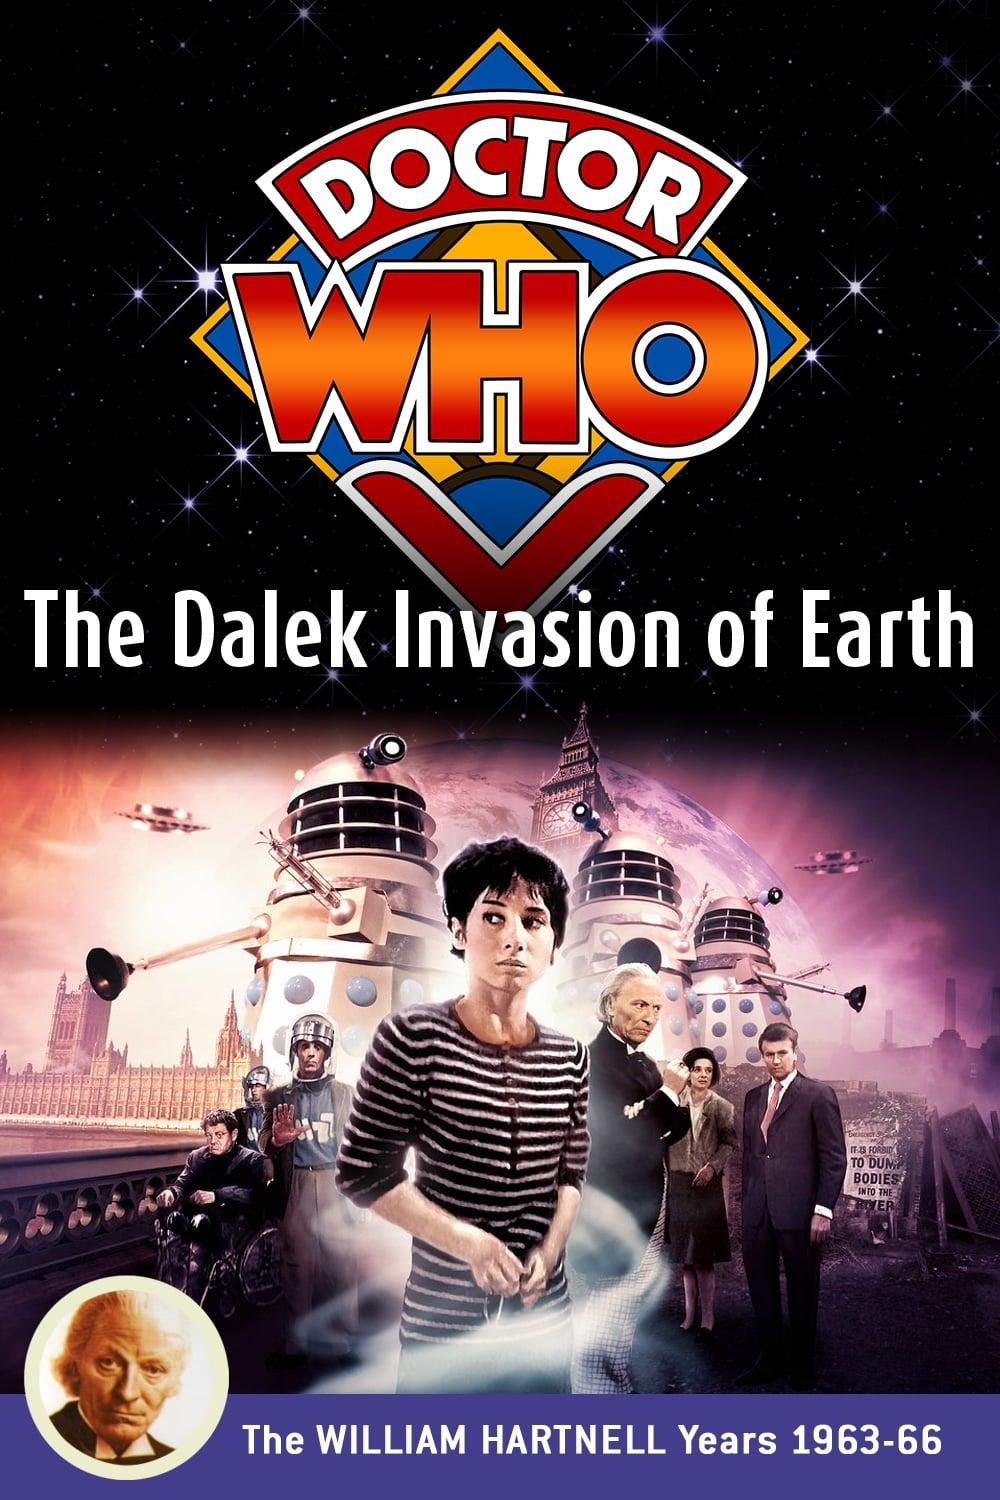 Doctor Who: The Dalek Invasion of Earth poster